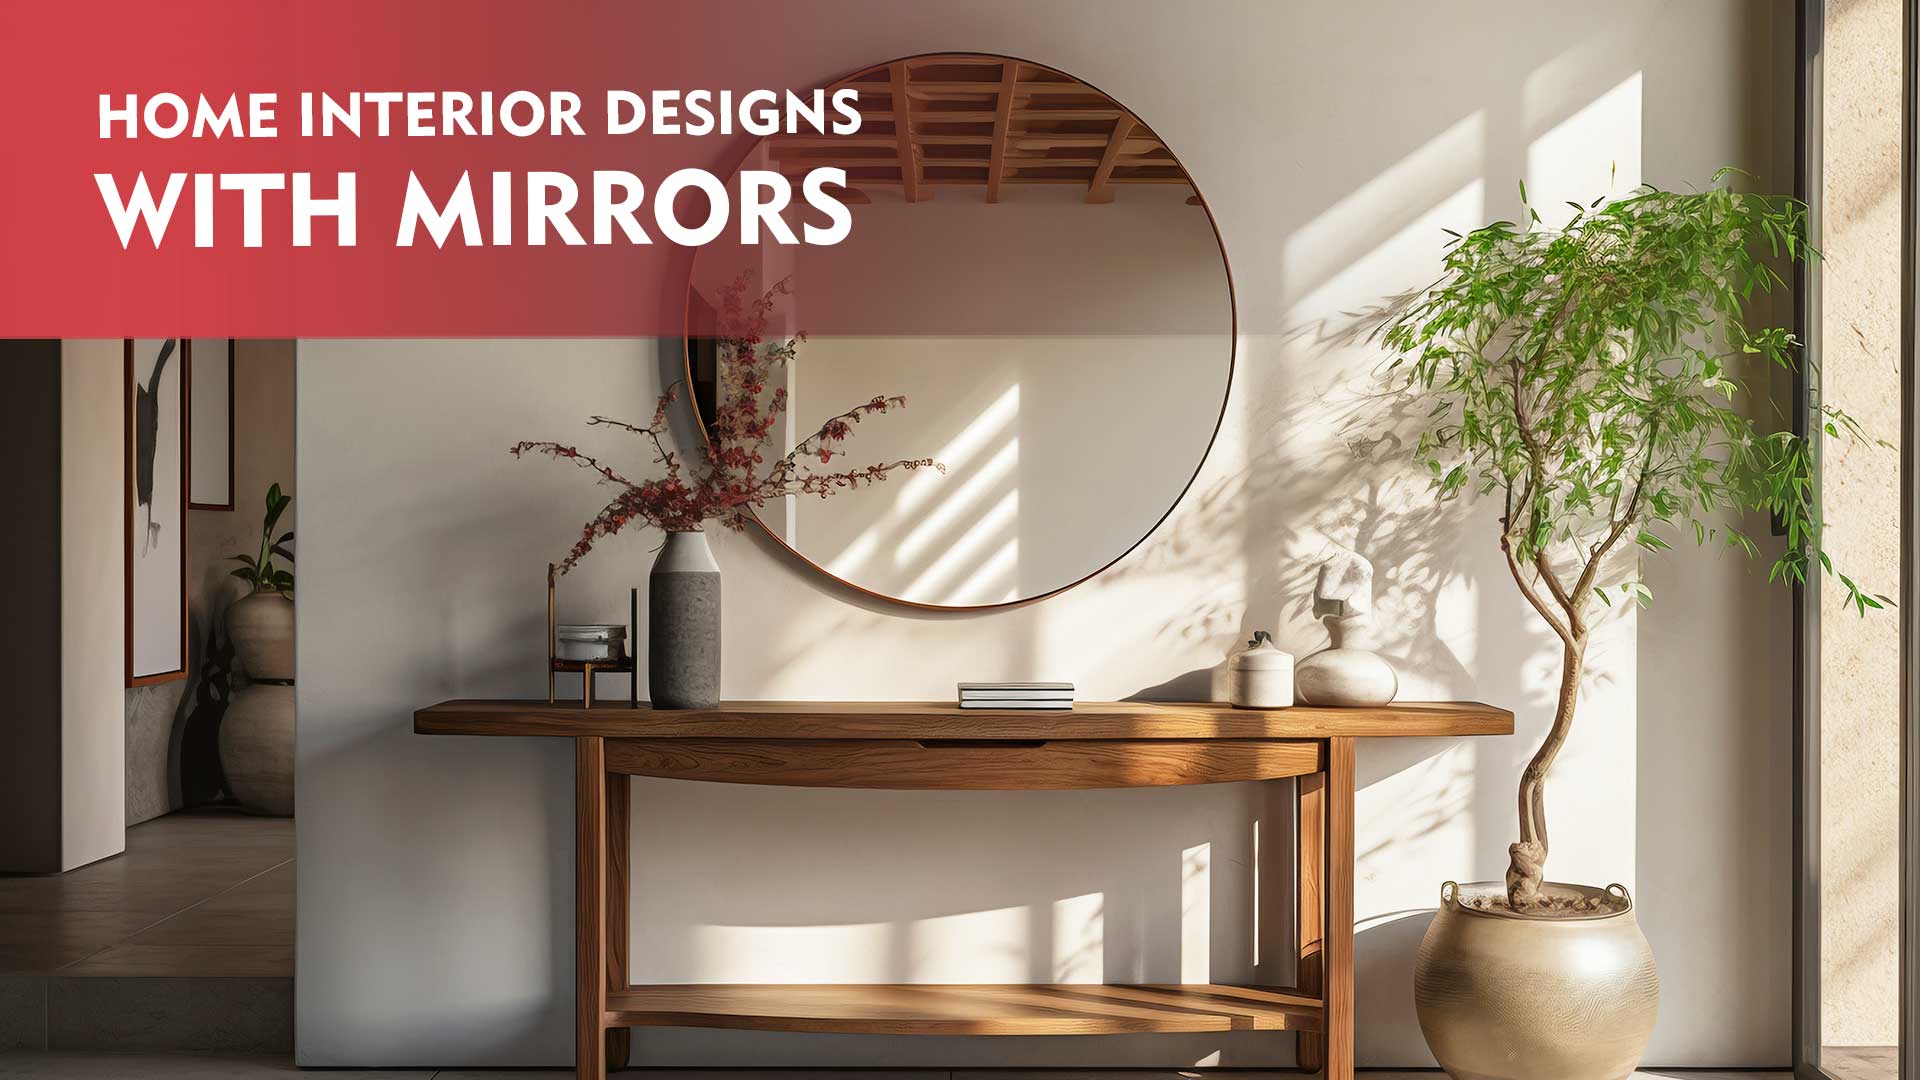 Utilizing Mirrors - Make Spaces Appear Bigger on a Budget